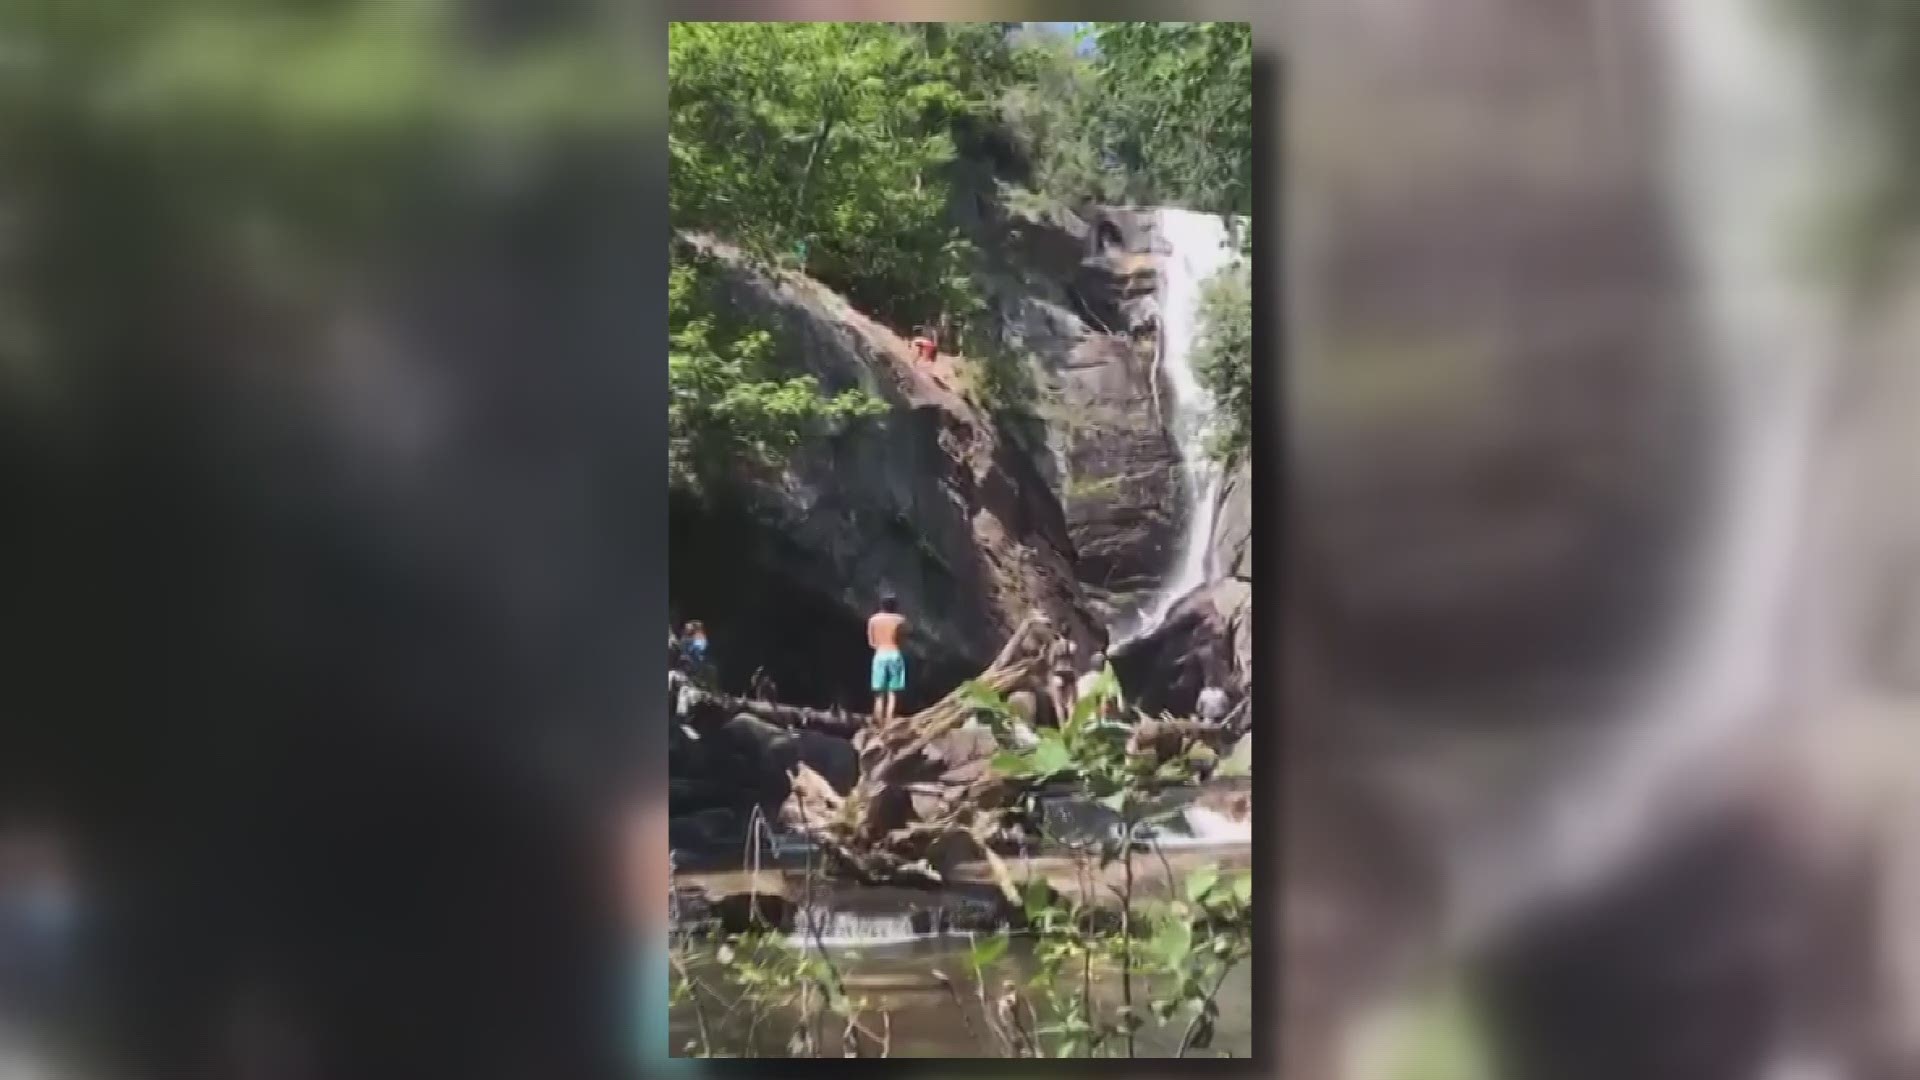 Cameron Stewart and friends were enjoying a nice day at Paradise Falls in North Carolina when his attempted backflip landed wrong causing a serious neck injury.